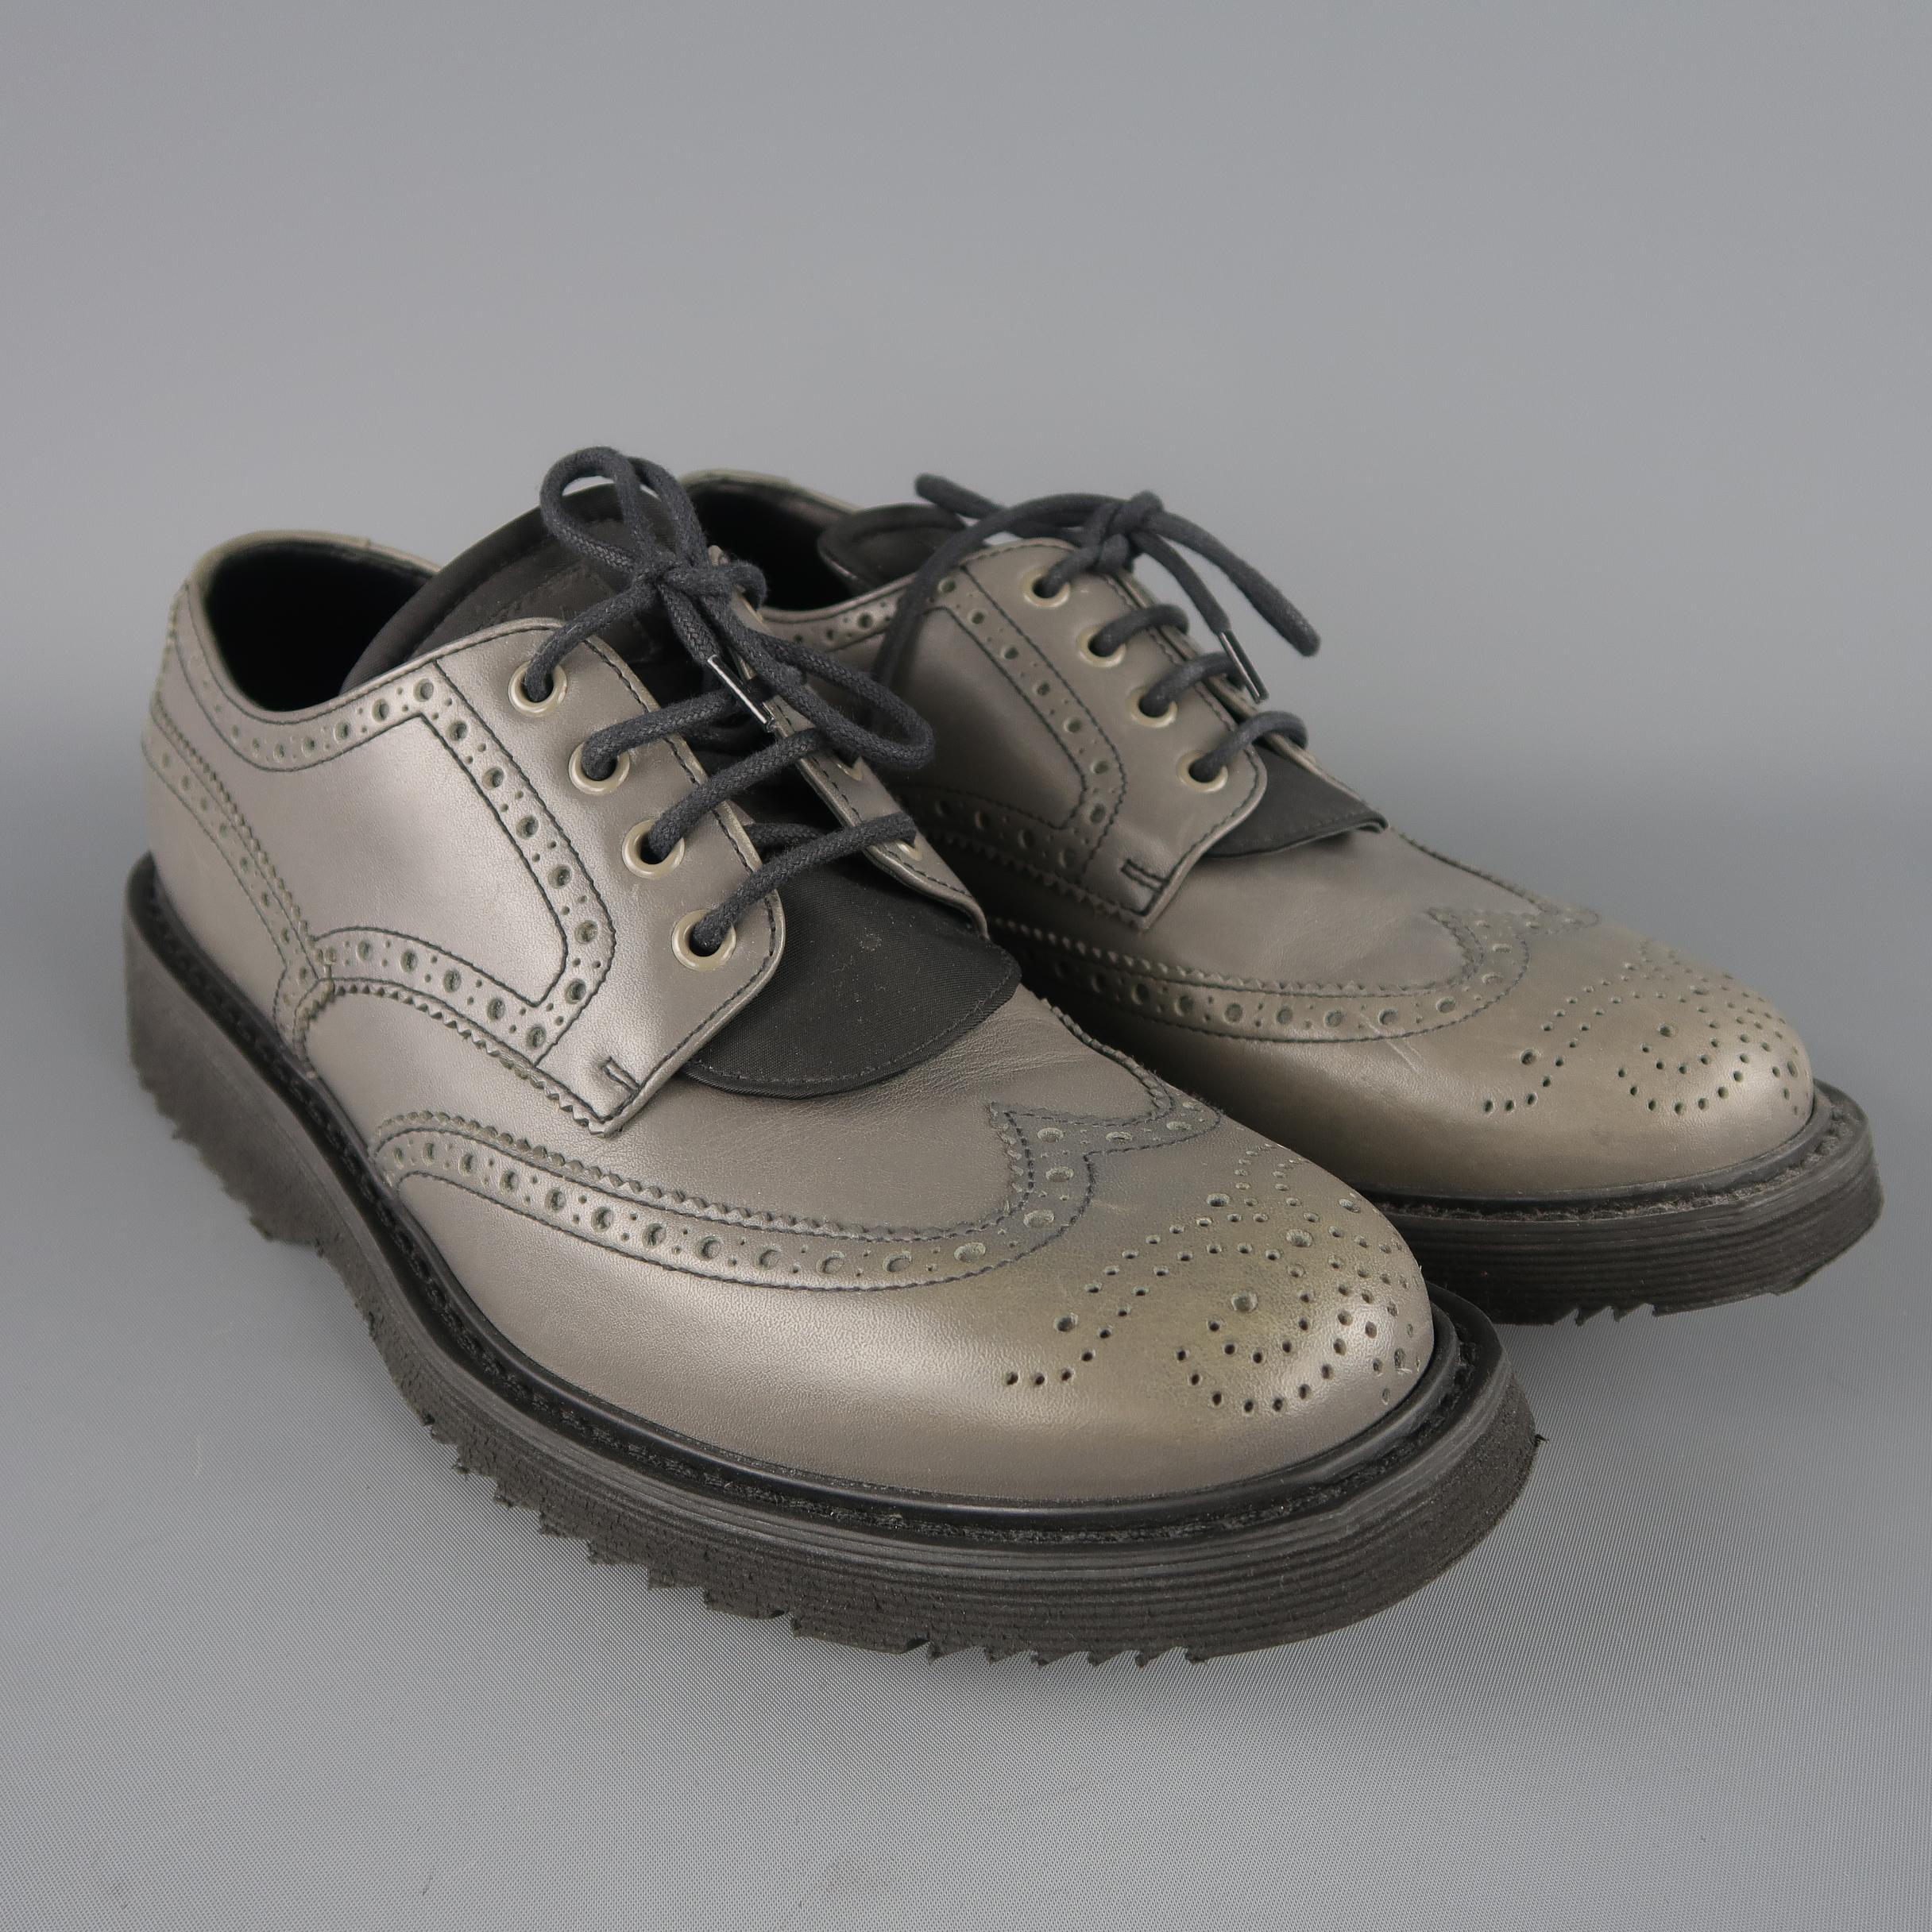 Prada shoes come in gray leather with a wingtip, perforated brogue trim, nylon padded logo tongue, and thick rubber sole. Discolorations and wear throughout. As-is. Made in Italy.
 
Fair Pre-Owned Condition.
Marked: UK 8